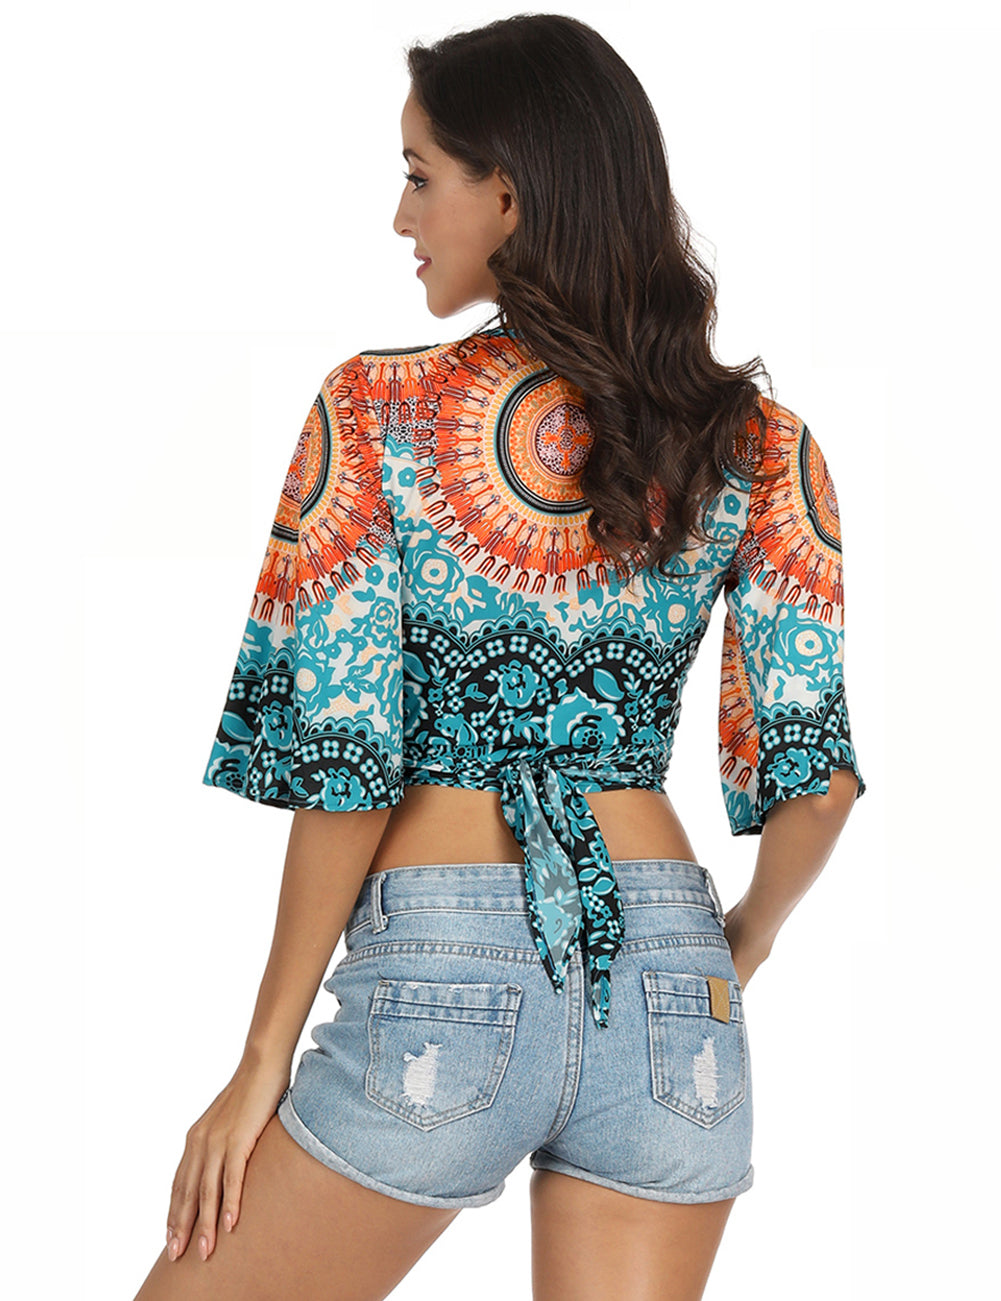 Cali Chic Women's Cover ups Celebrity Knotted Bohemian Print Fashion